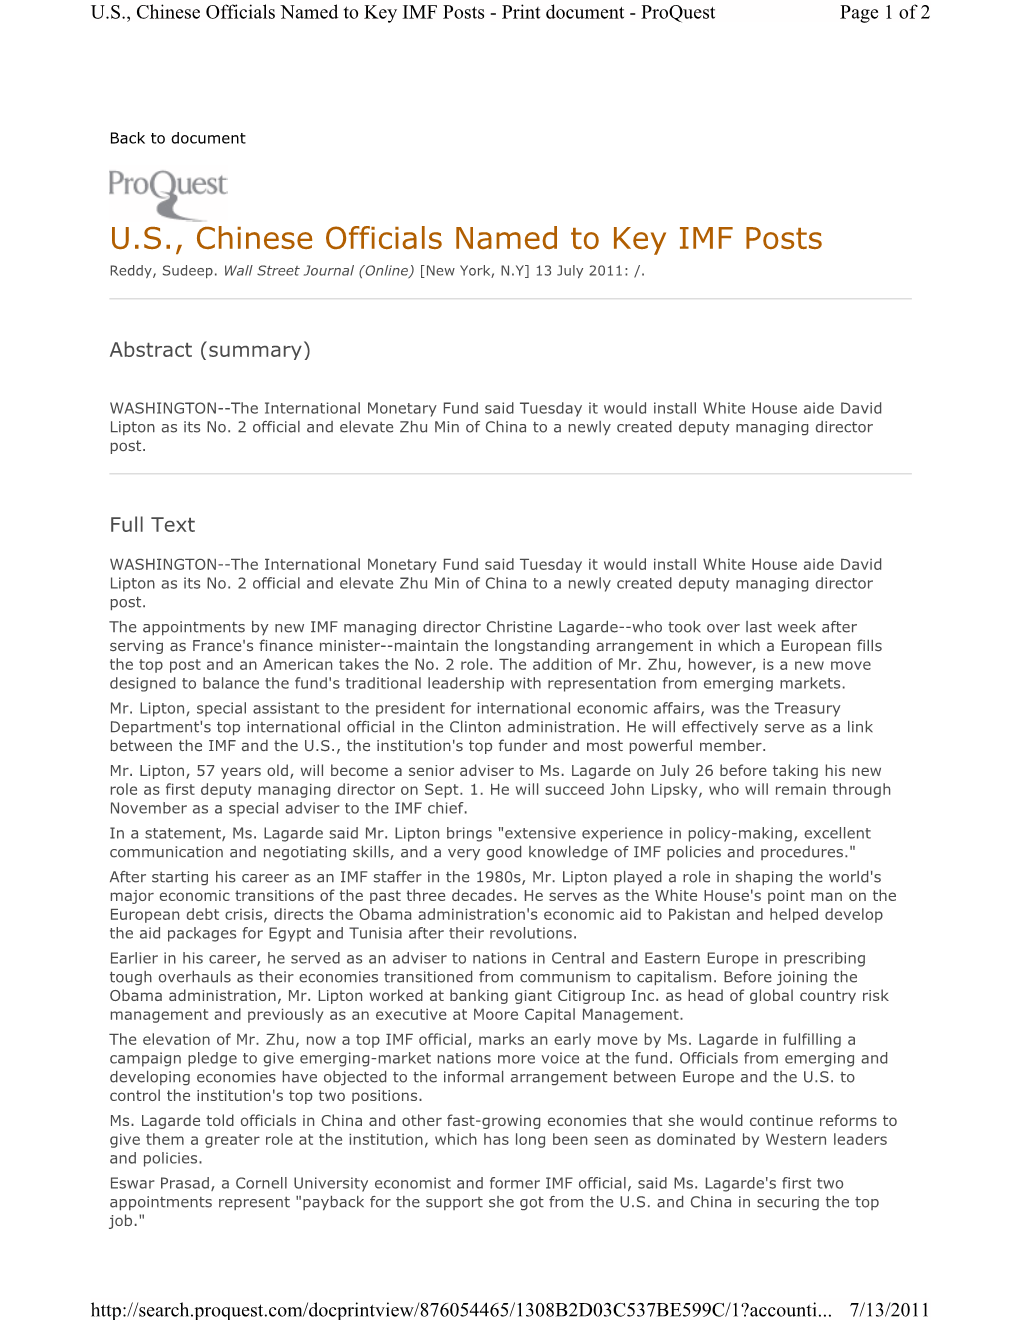 U.S., Chinese Officials Named to Key IMF Posts - Print Document - Proquest Page 1 of 2